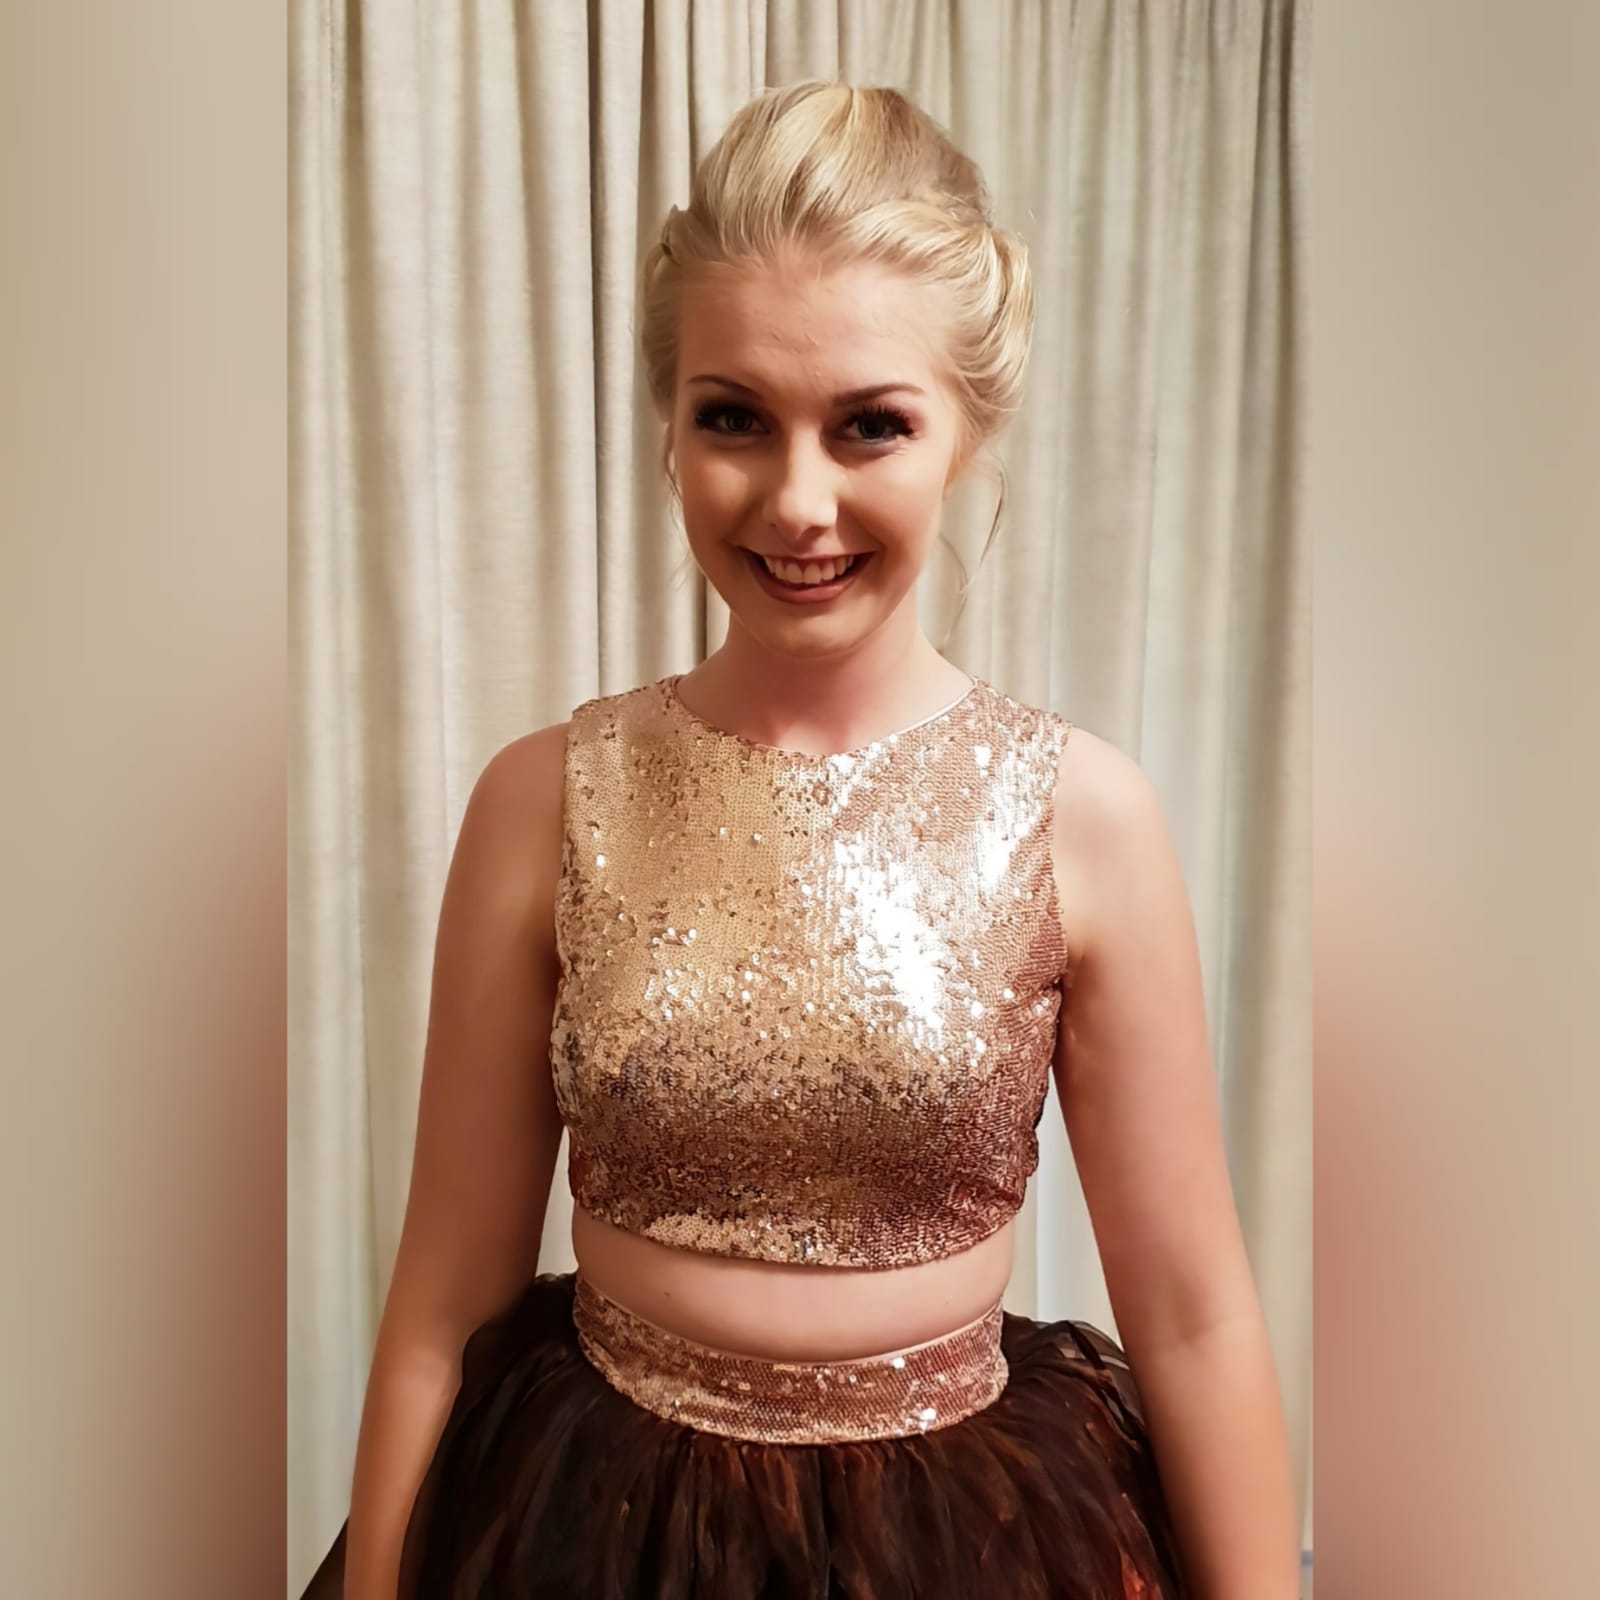 2 piece brown and rose gold prom dress 5 this awesome versatile evening dress was created for a prom dance. 2 piece brown and rose gold prom dress. With a layered organza full skirt and sequins waistband. Crop top in rosegold sequins which can be reused in several other occasions.